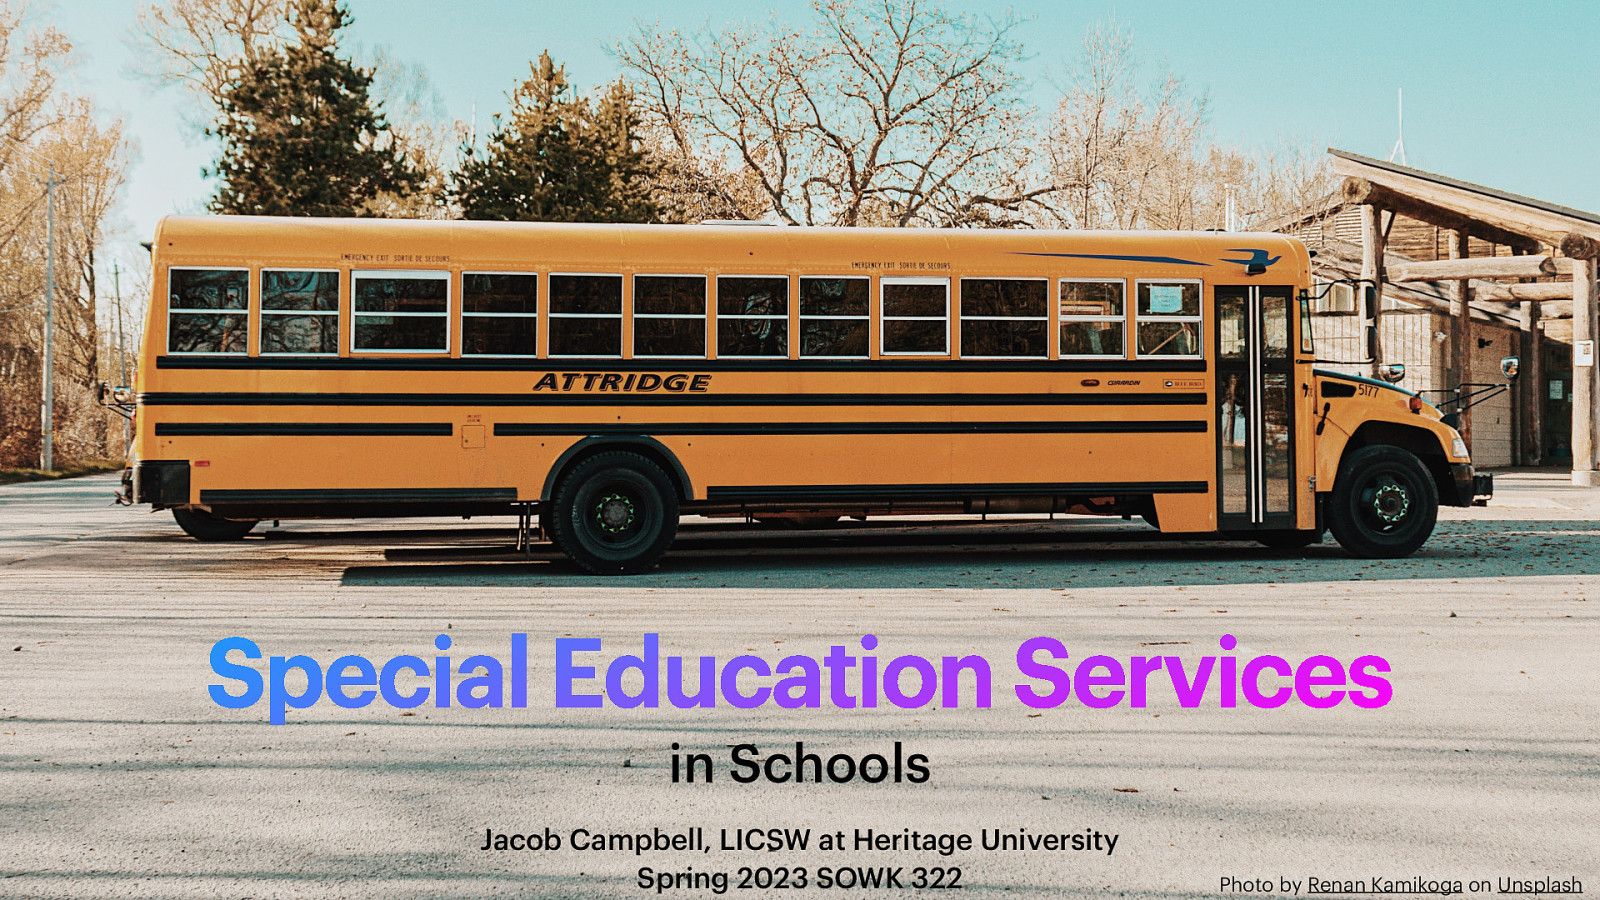 Spring 2023 SOWK 322 Week 03 - Special Education Services in Schools by Jacob Campbell